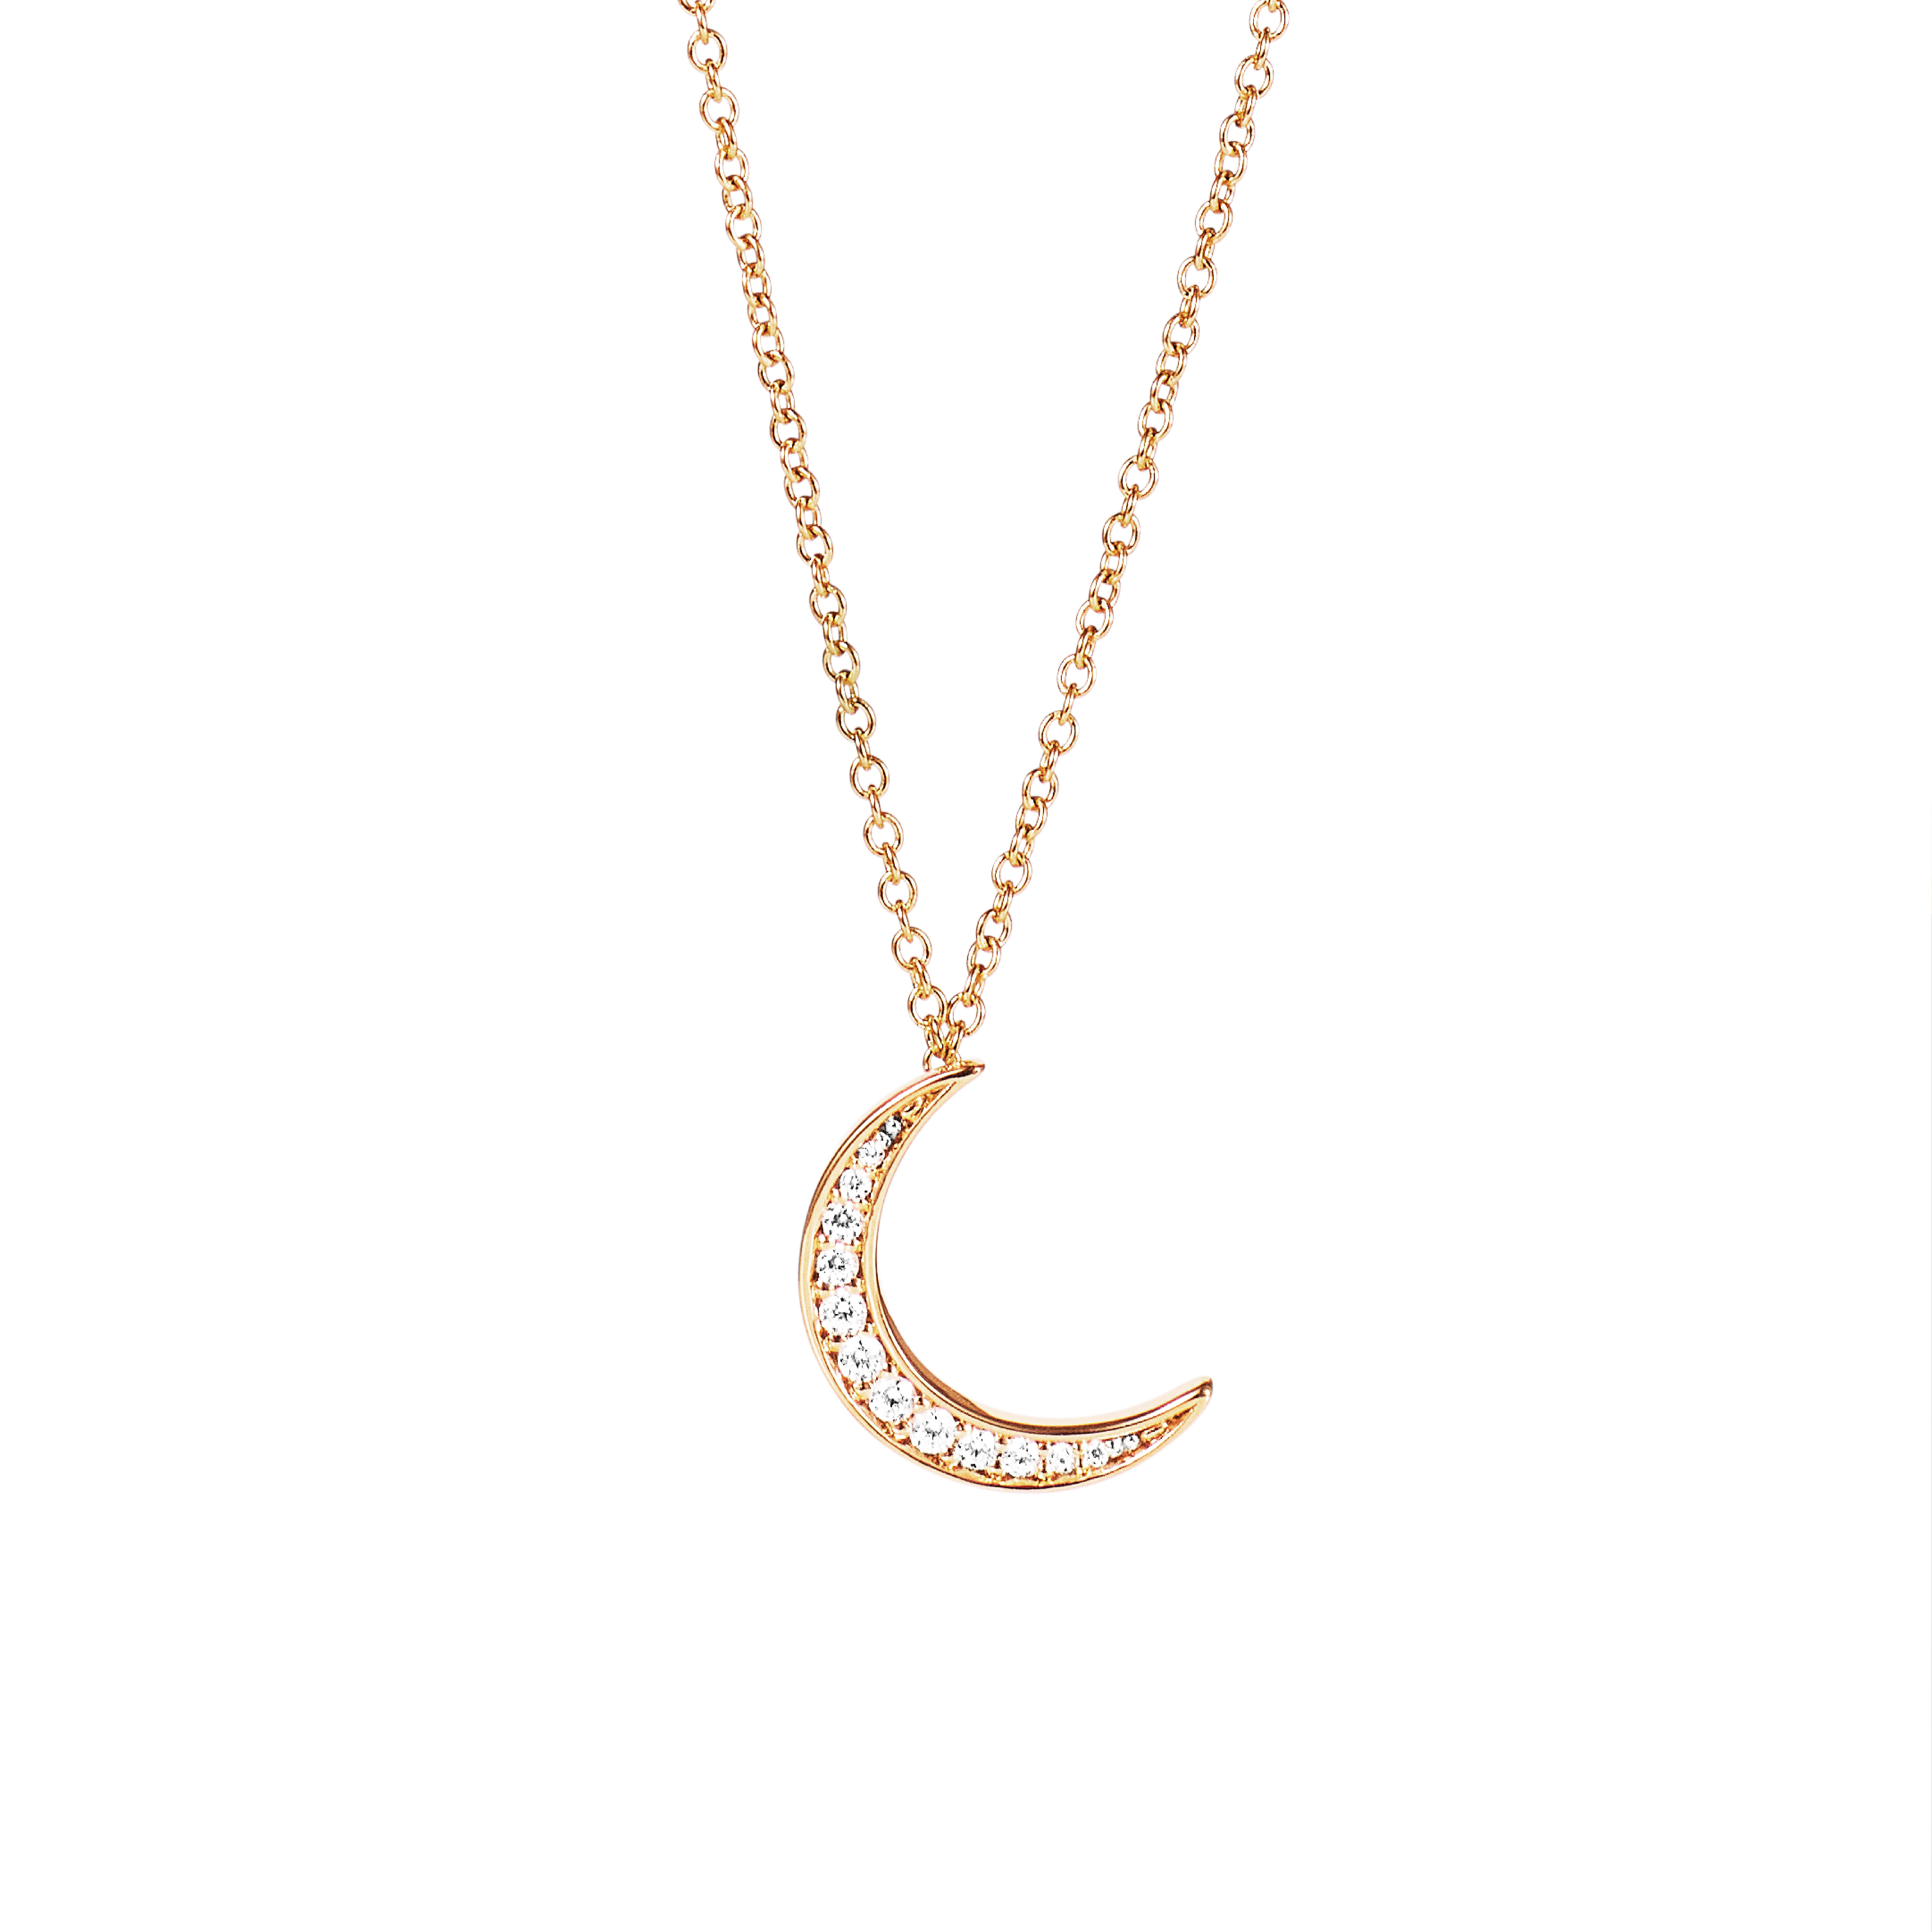 PENCEZ MOON & STARS NECKLACE